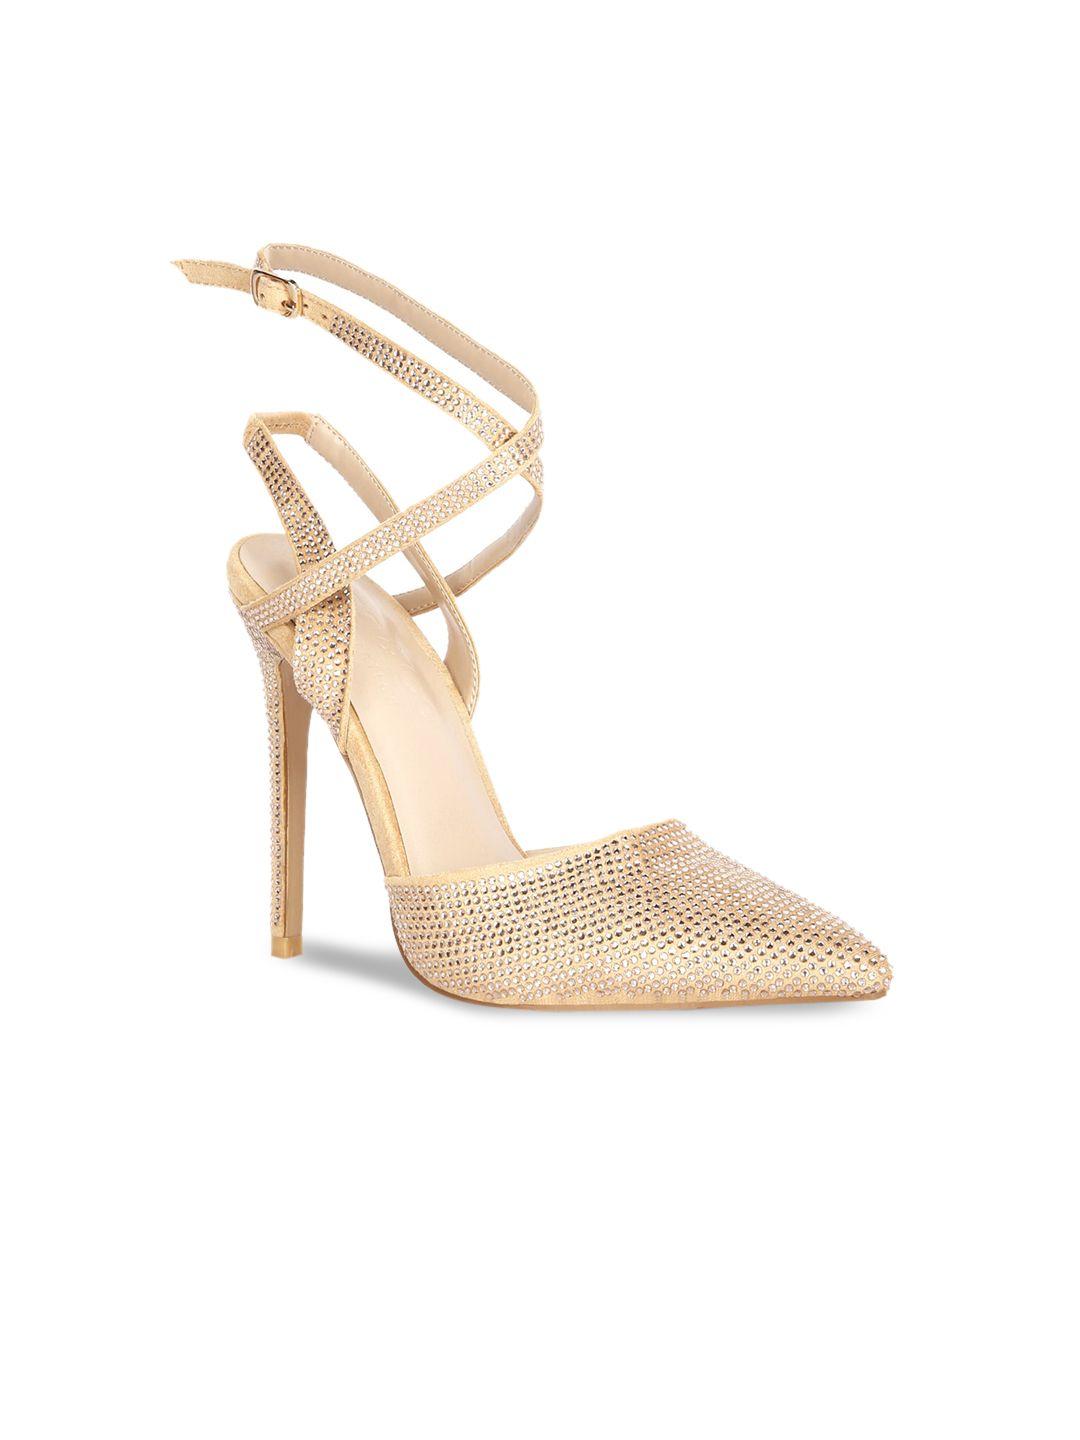 rag & co embellished party stiletto pumps